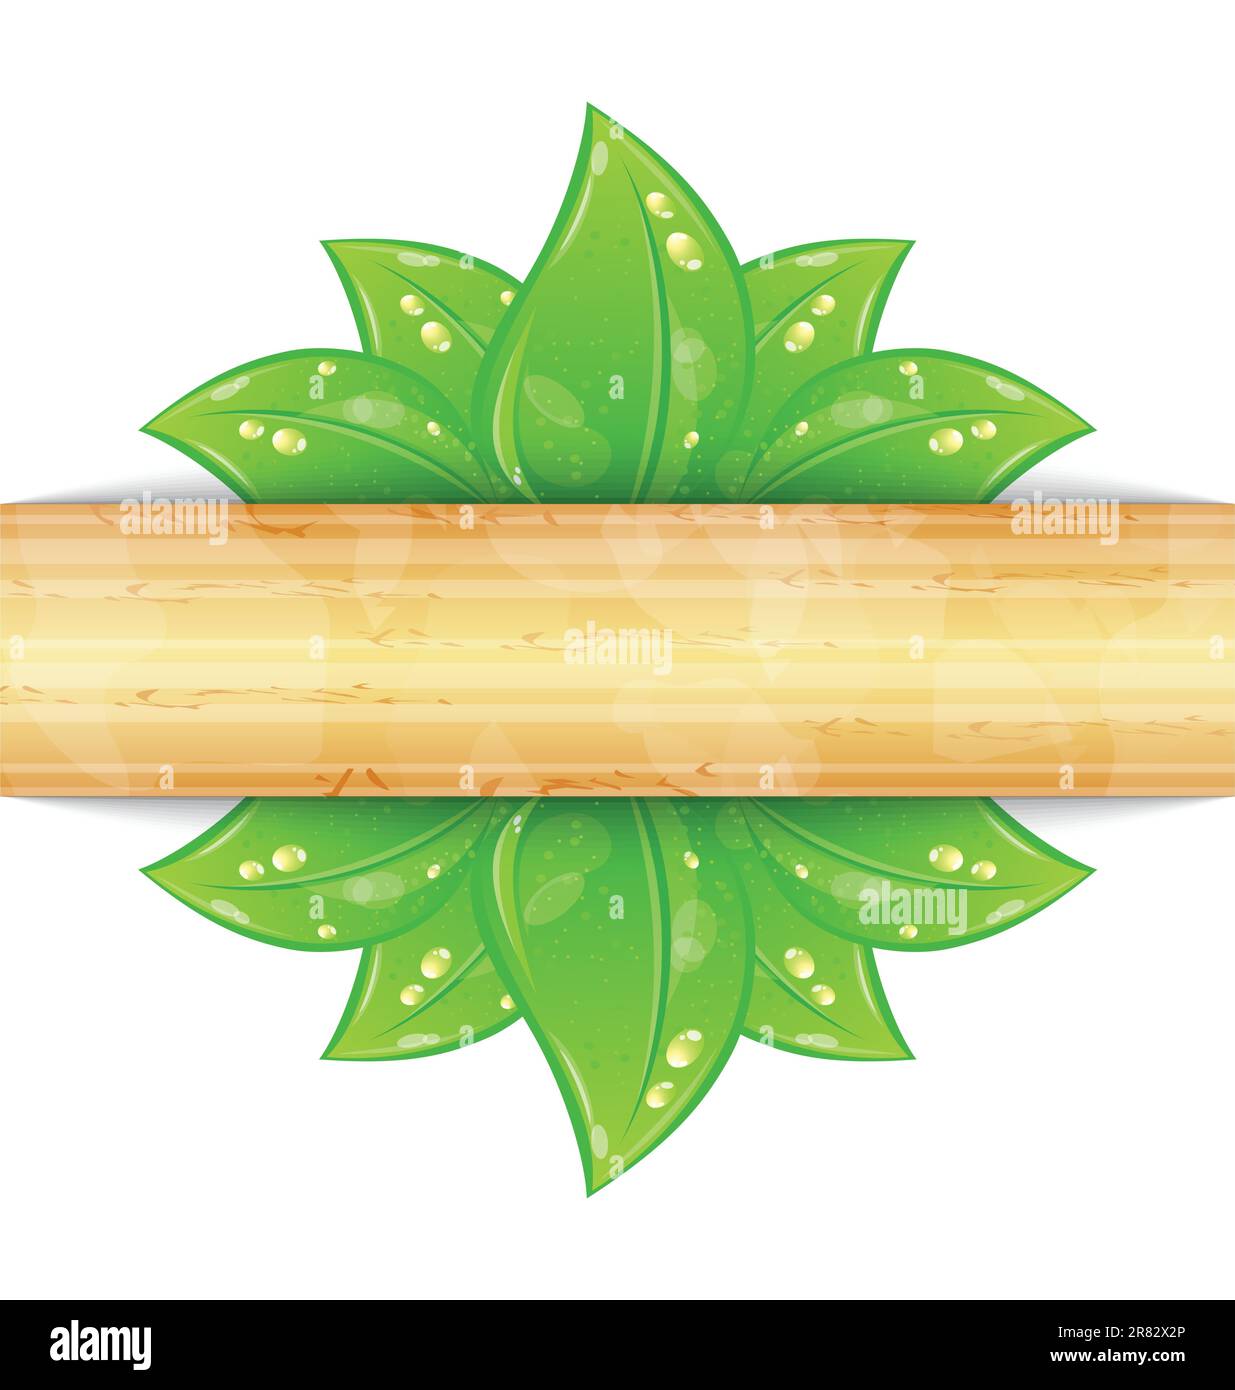 Illustration eco friendly background with green leaves, wooden texture - vector Stock Vector